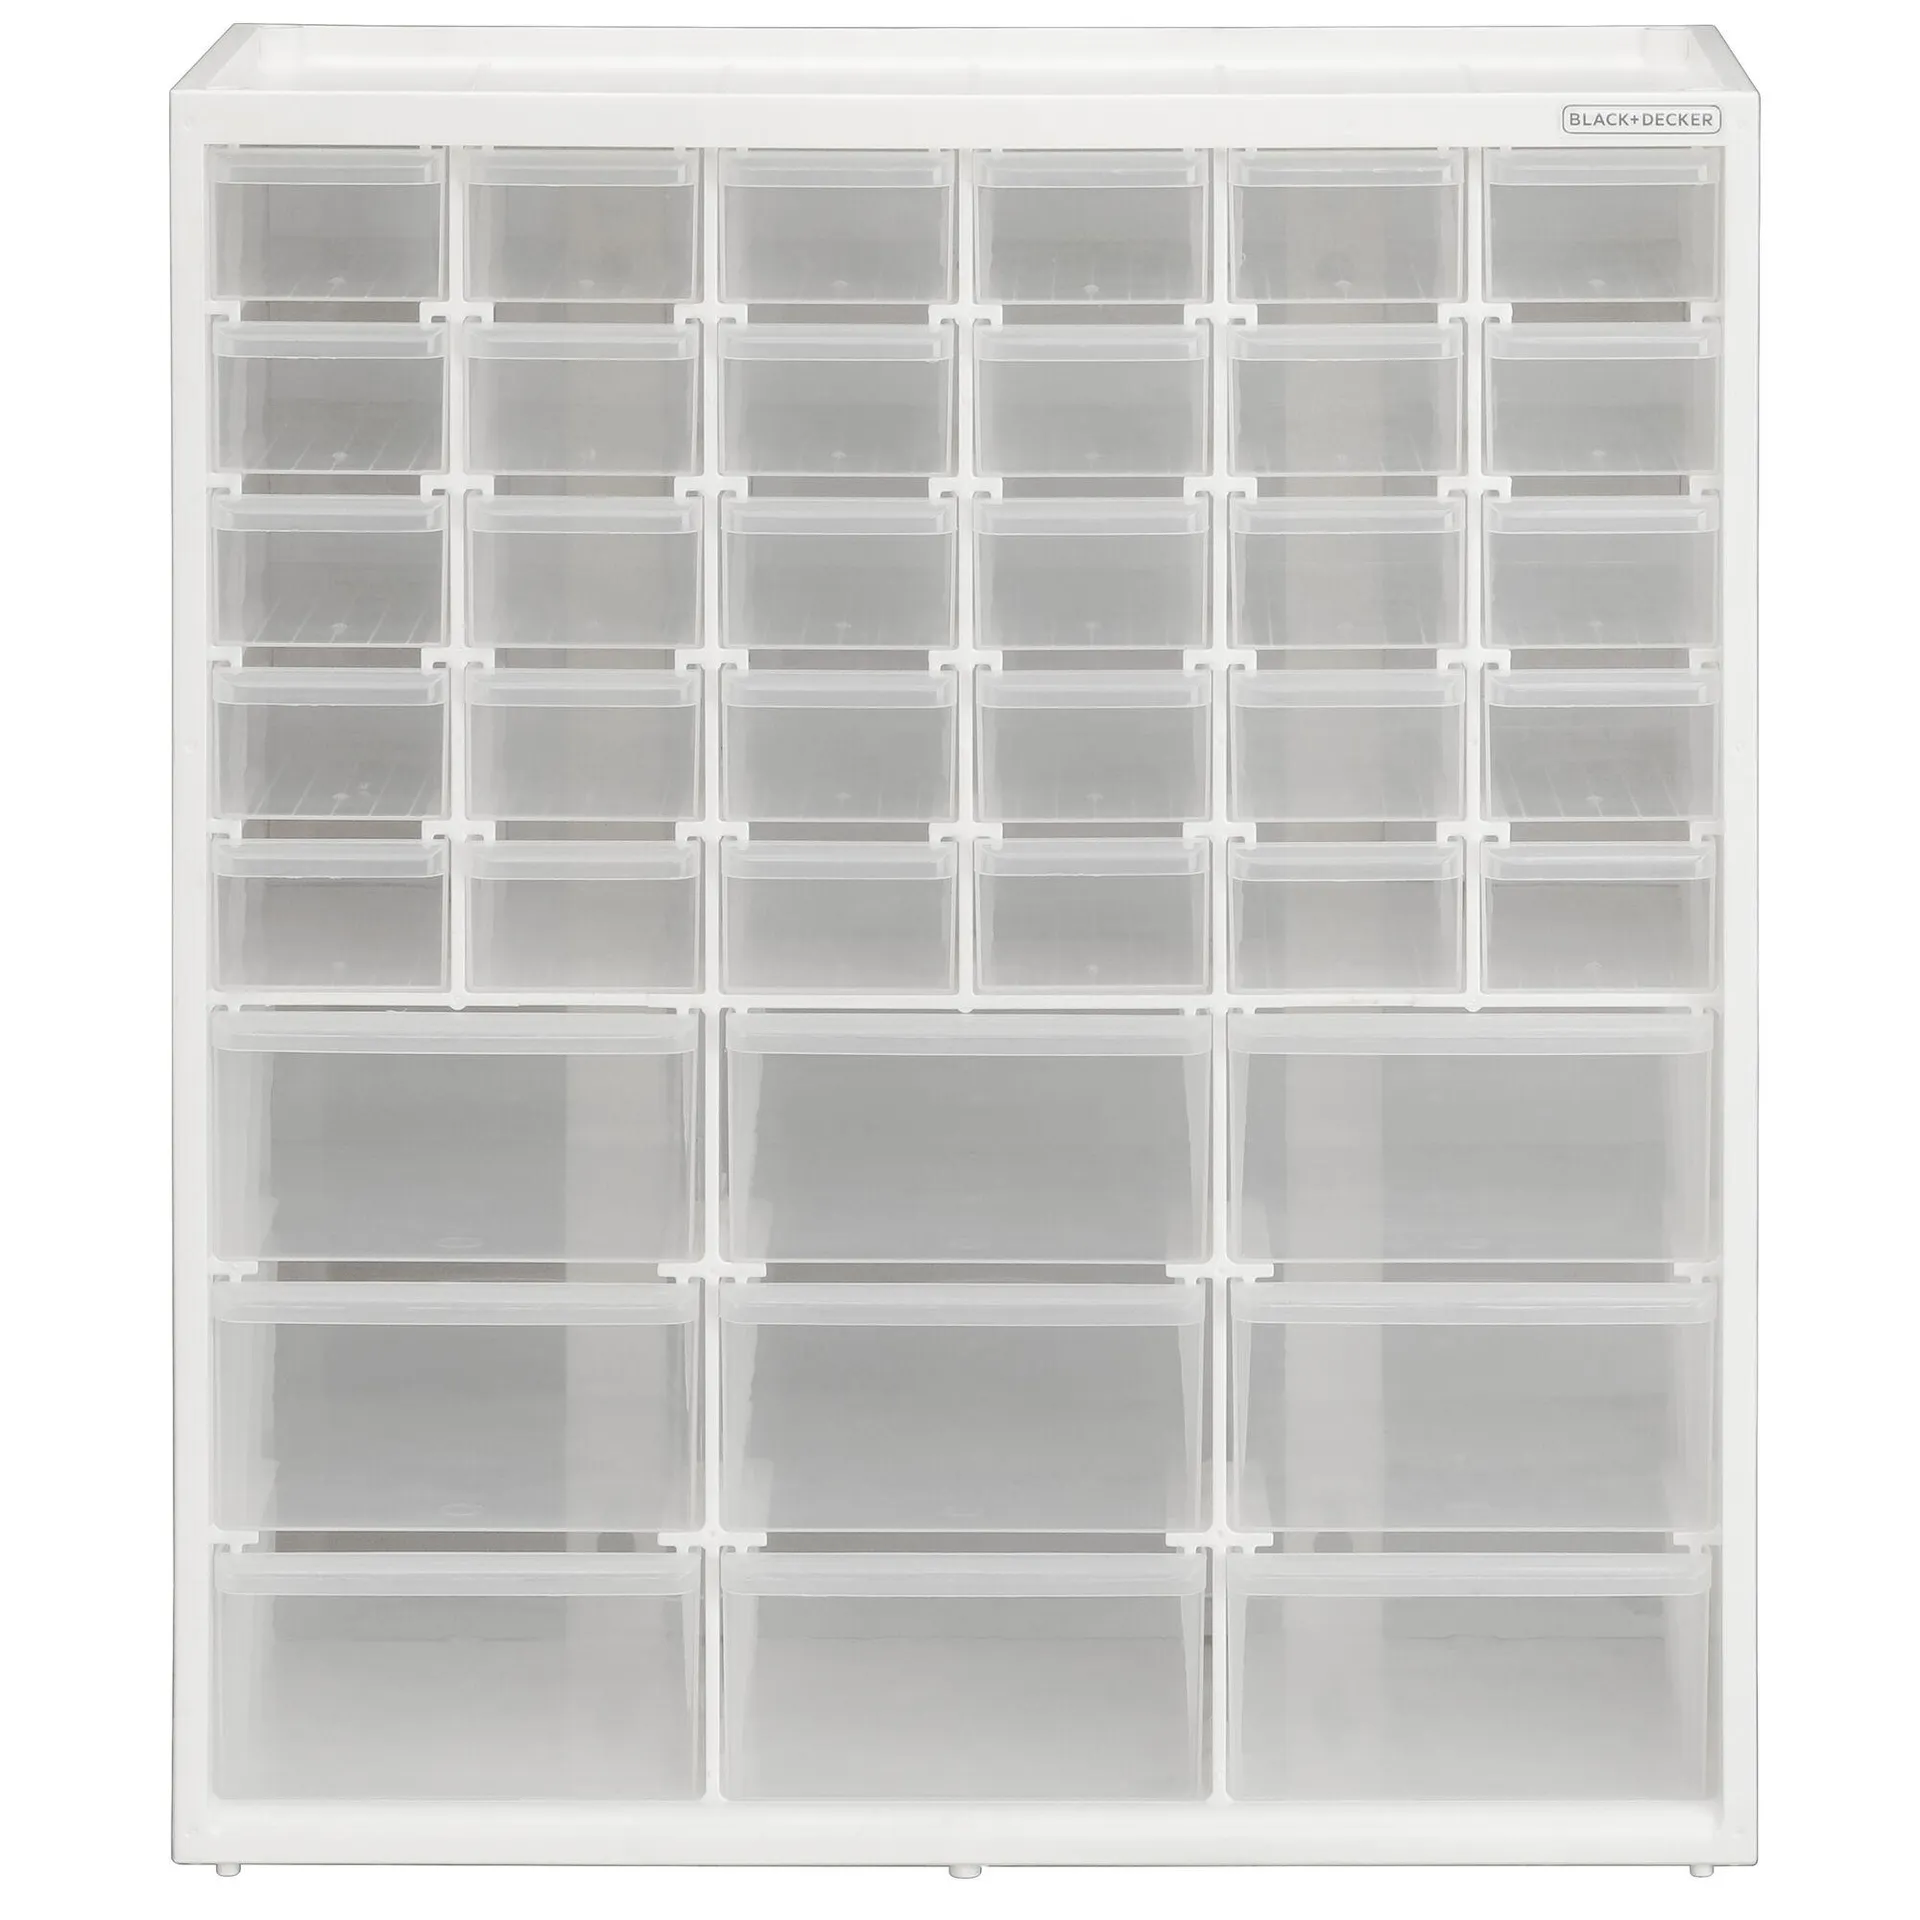 Large & Small 39 Drawer Bin System